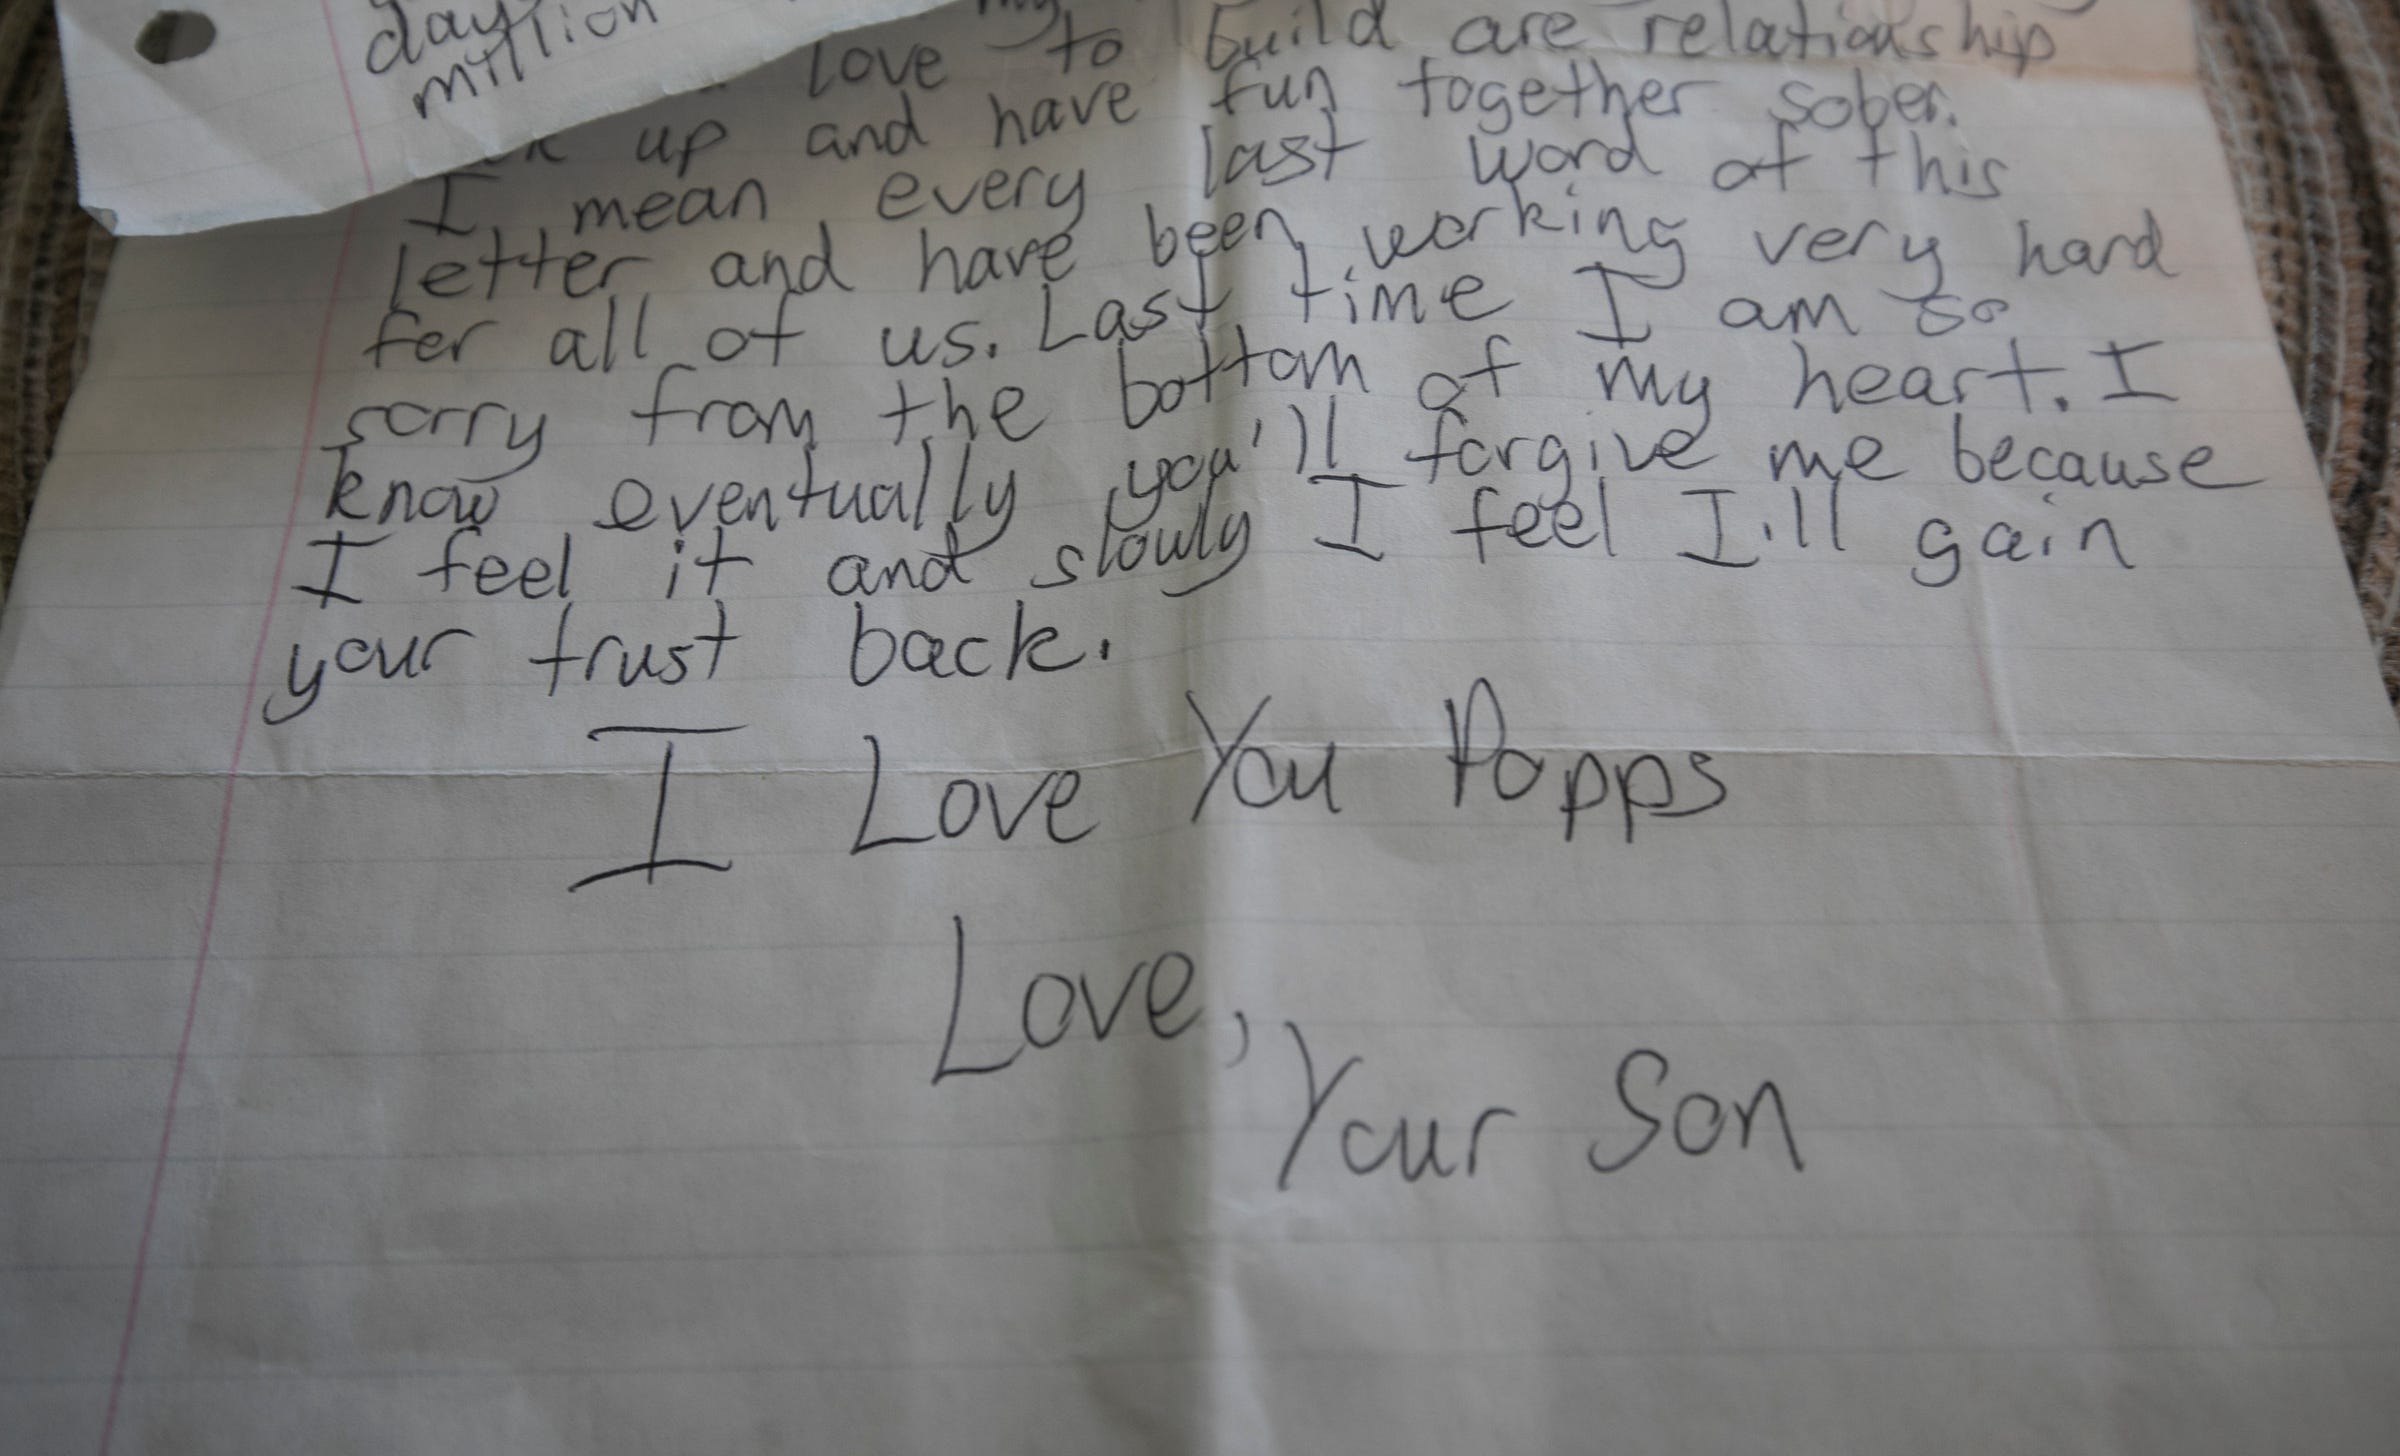 Andy Hopson, 51, of Livonia, a recovering addict, talks about the loss of his son Dakota, who died on May, 5, 2016, of a heroin overdose. He received this letter from his son, who was in rehab in California at the time.